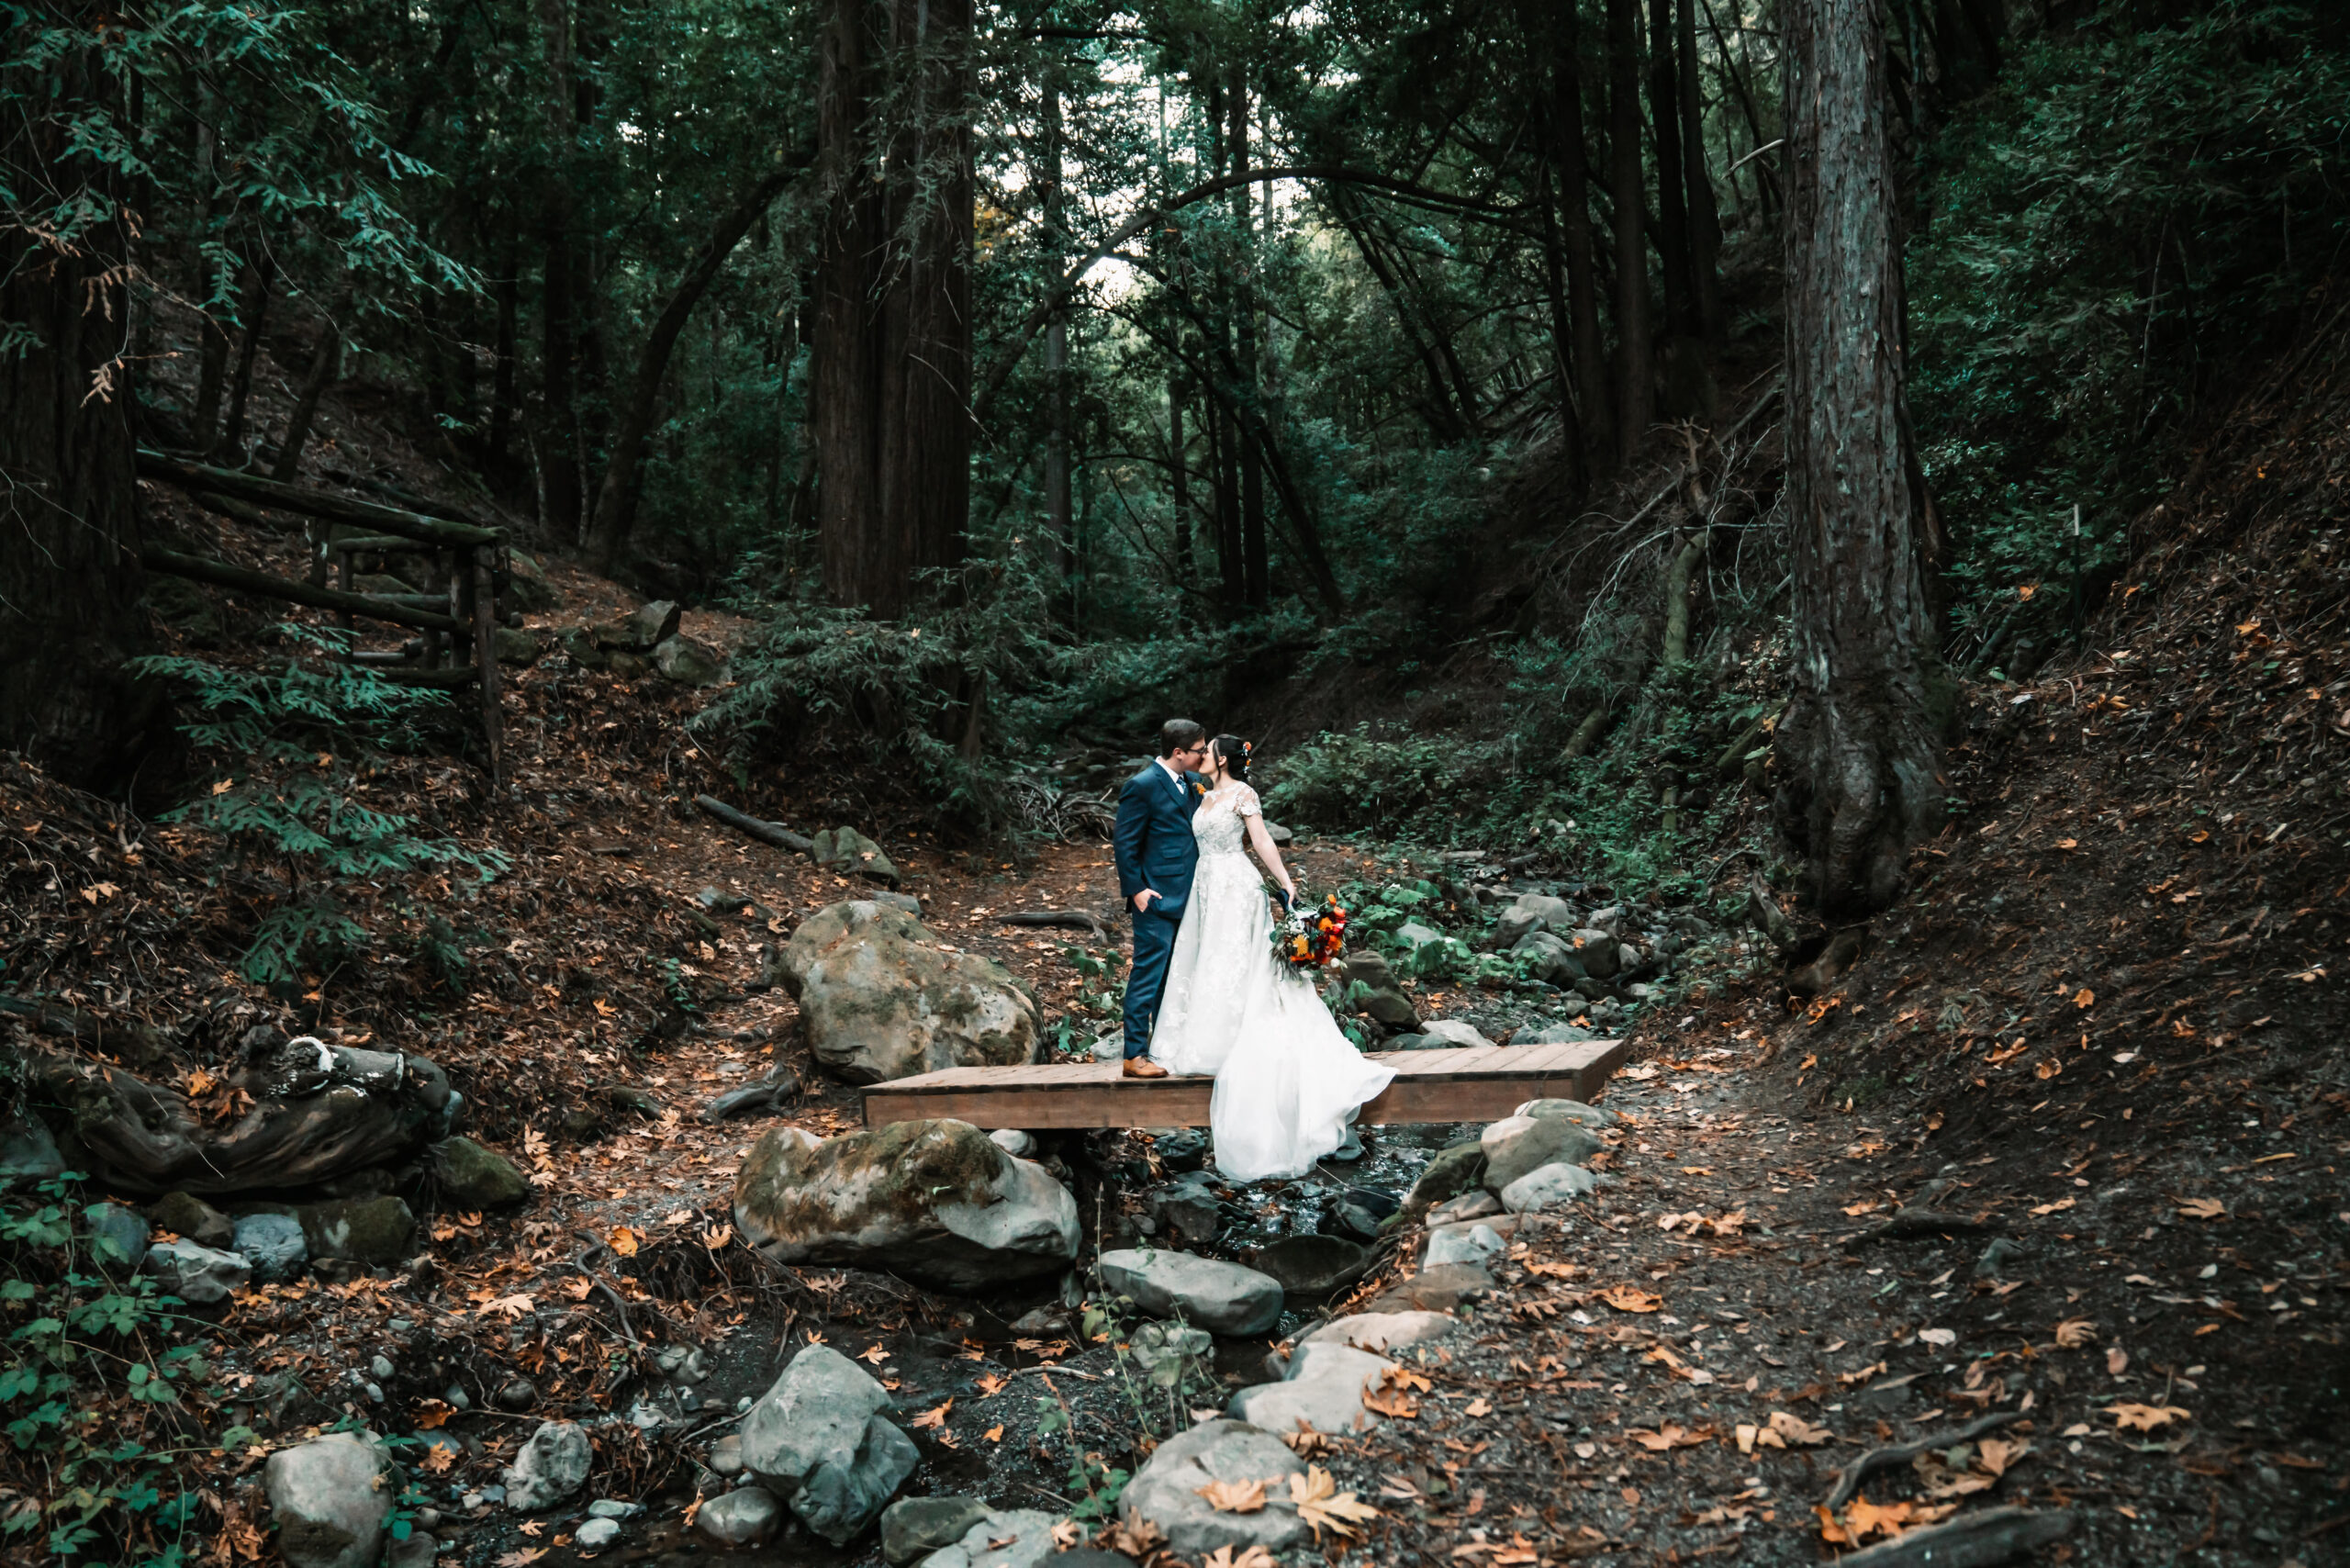 A bride and groom kissing and standing on a bridge in the forest for their wedding day